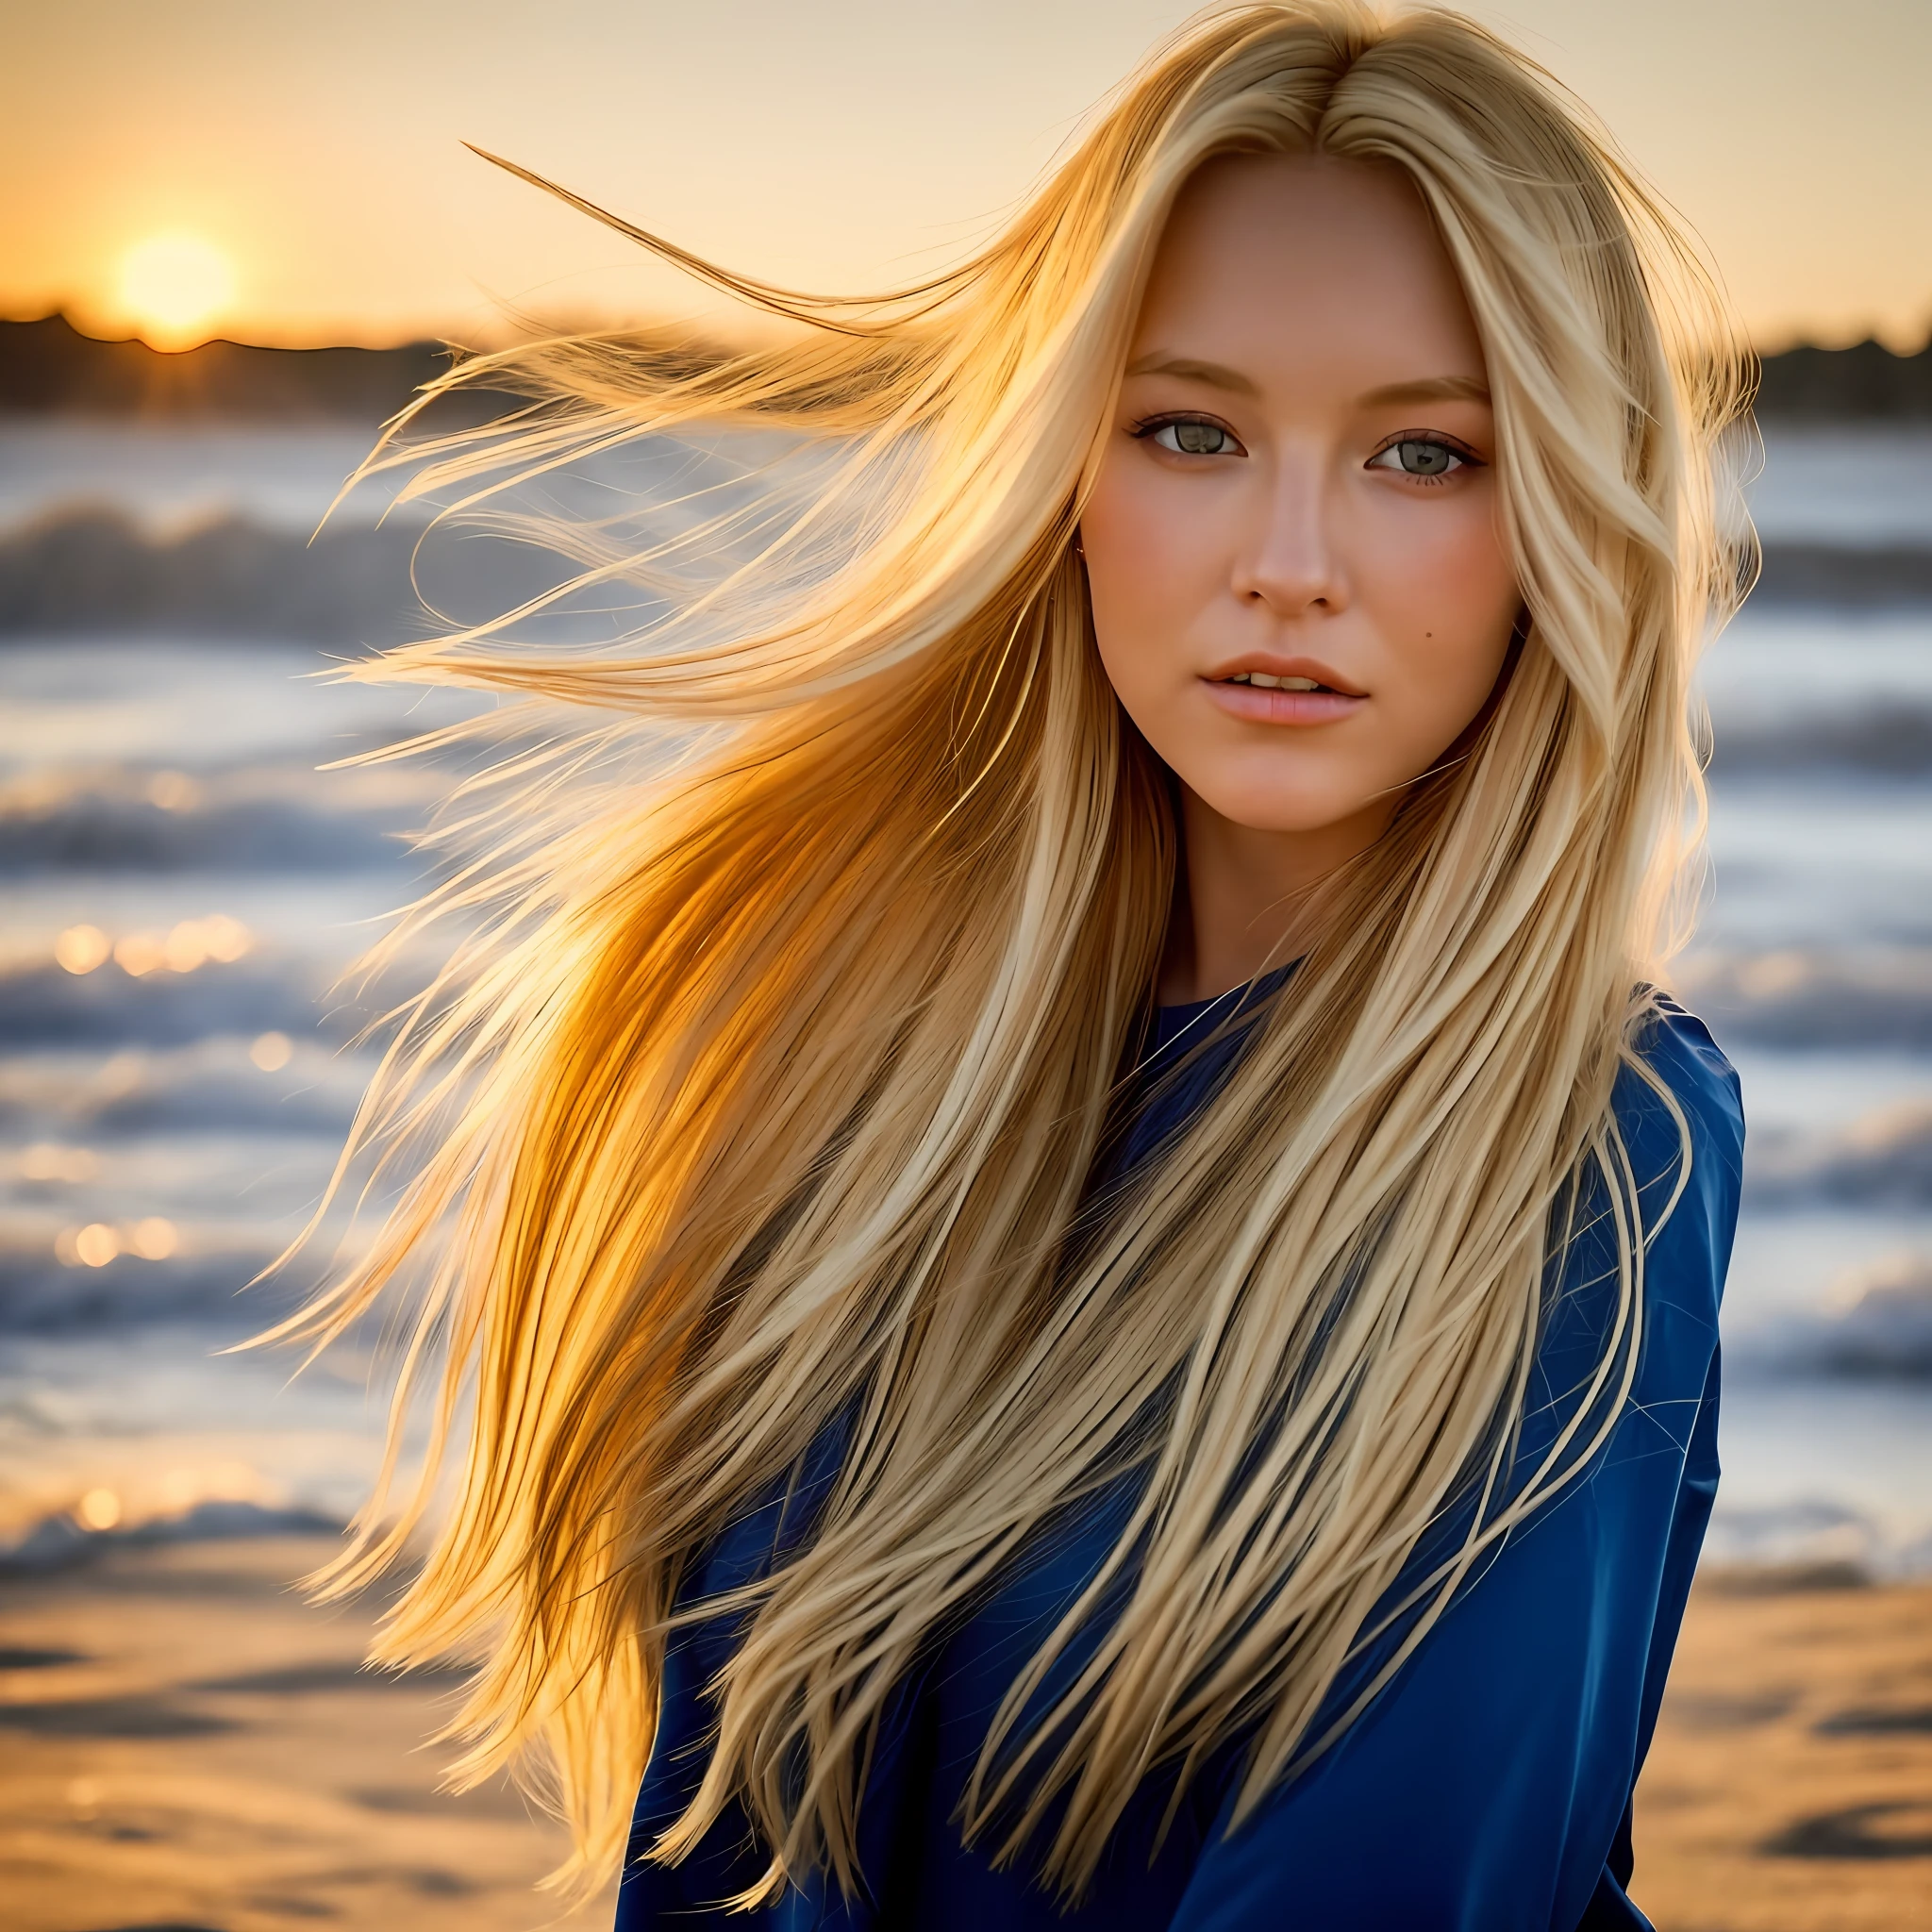 **With her fair blonde hair flowing in the wind, the stunning Swedish girl radiated a captivating Nordic beauty as the golden sunlight kissed her skin.** -